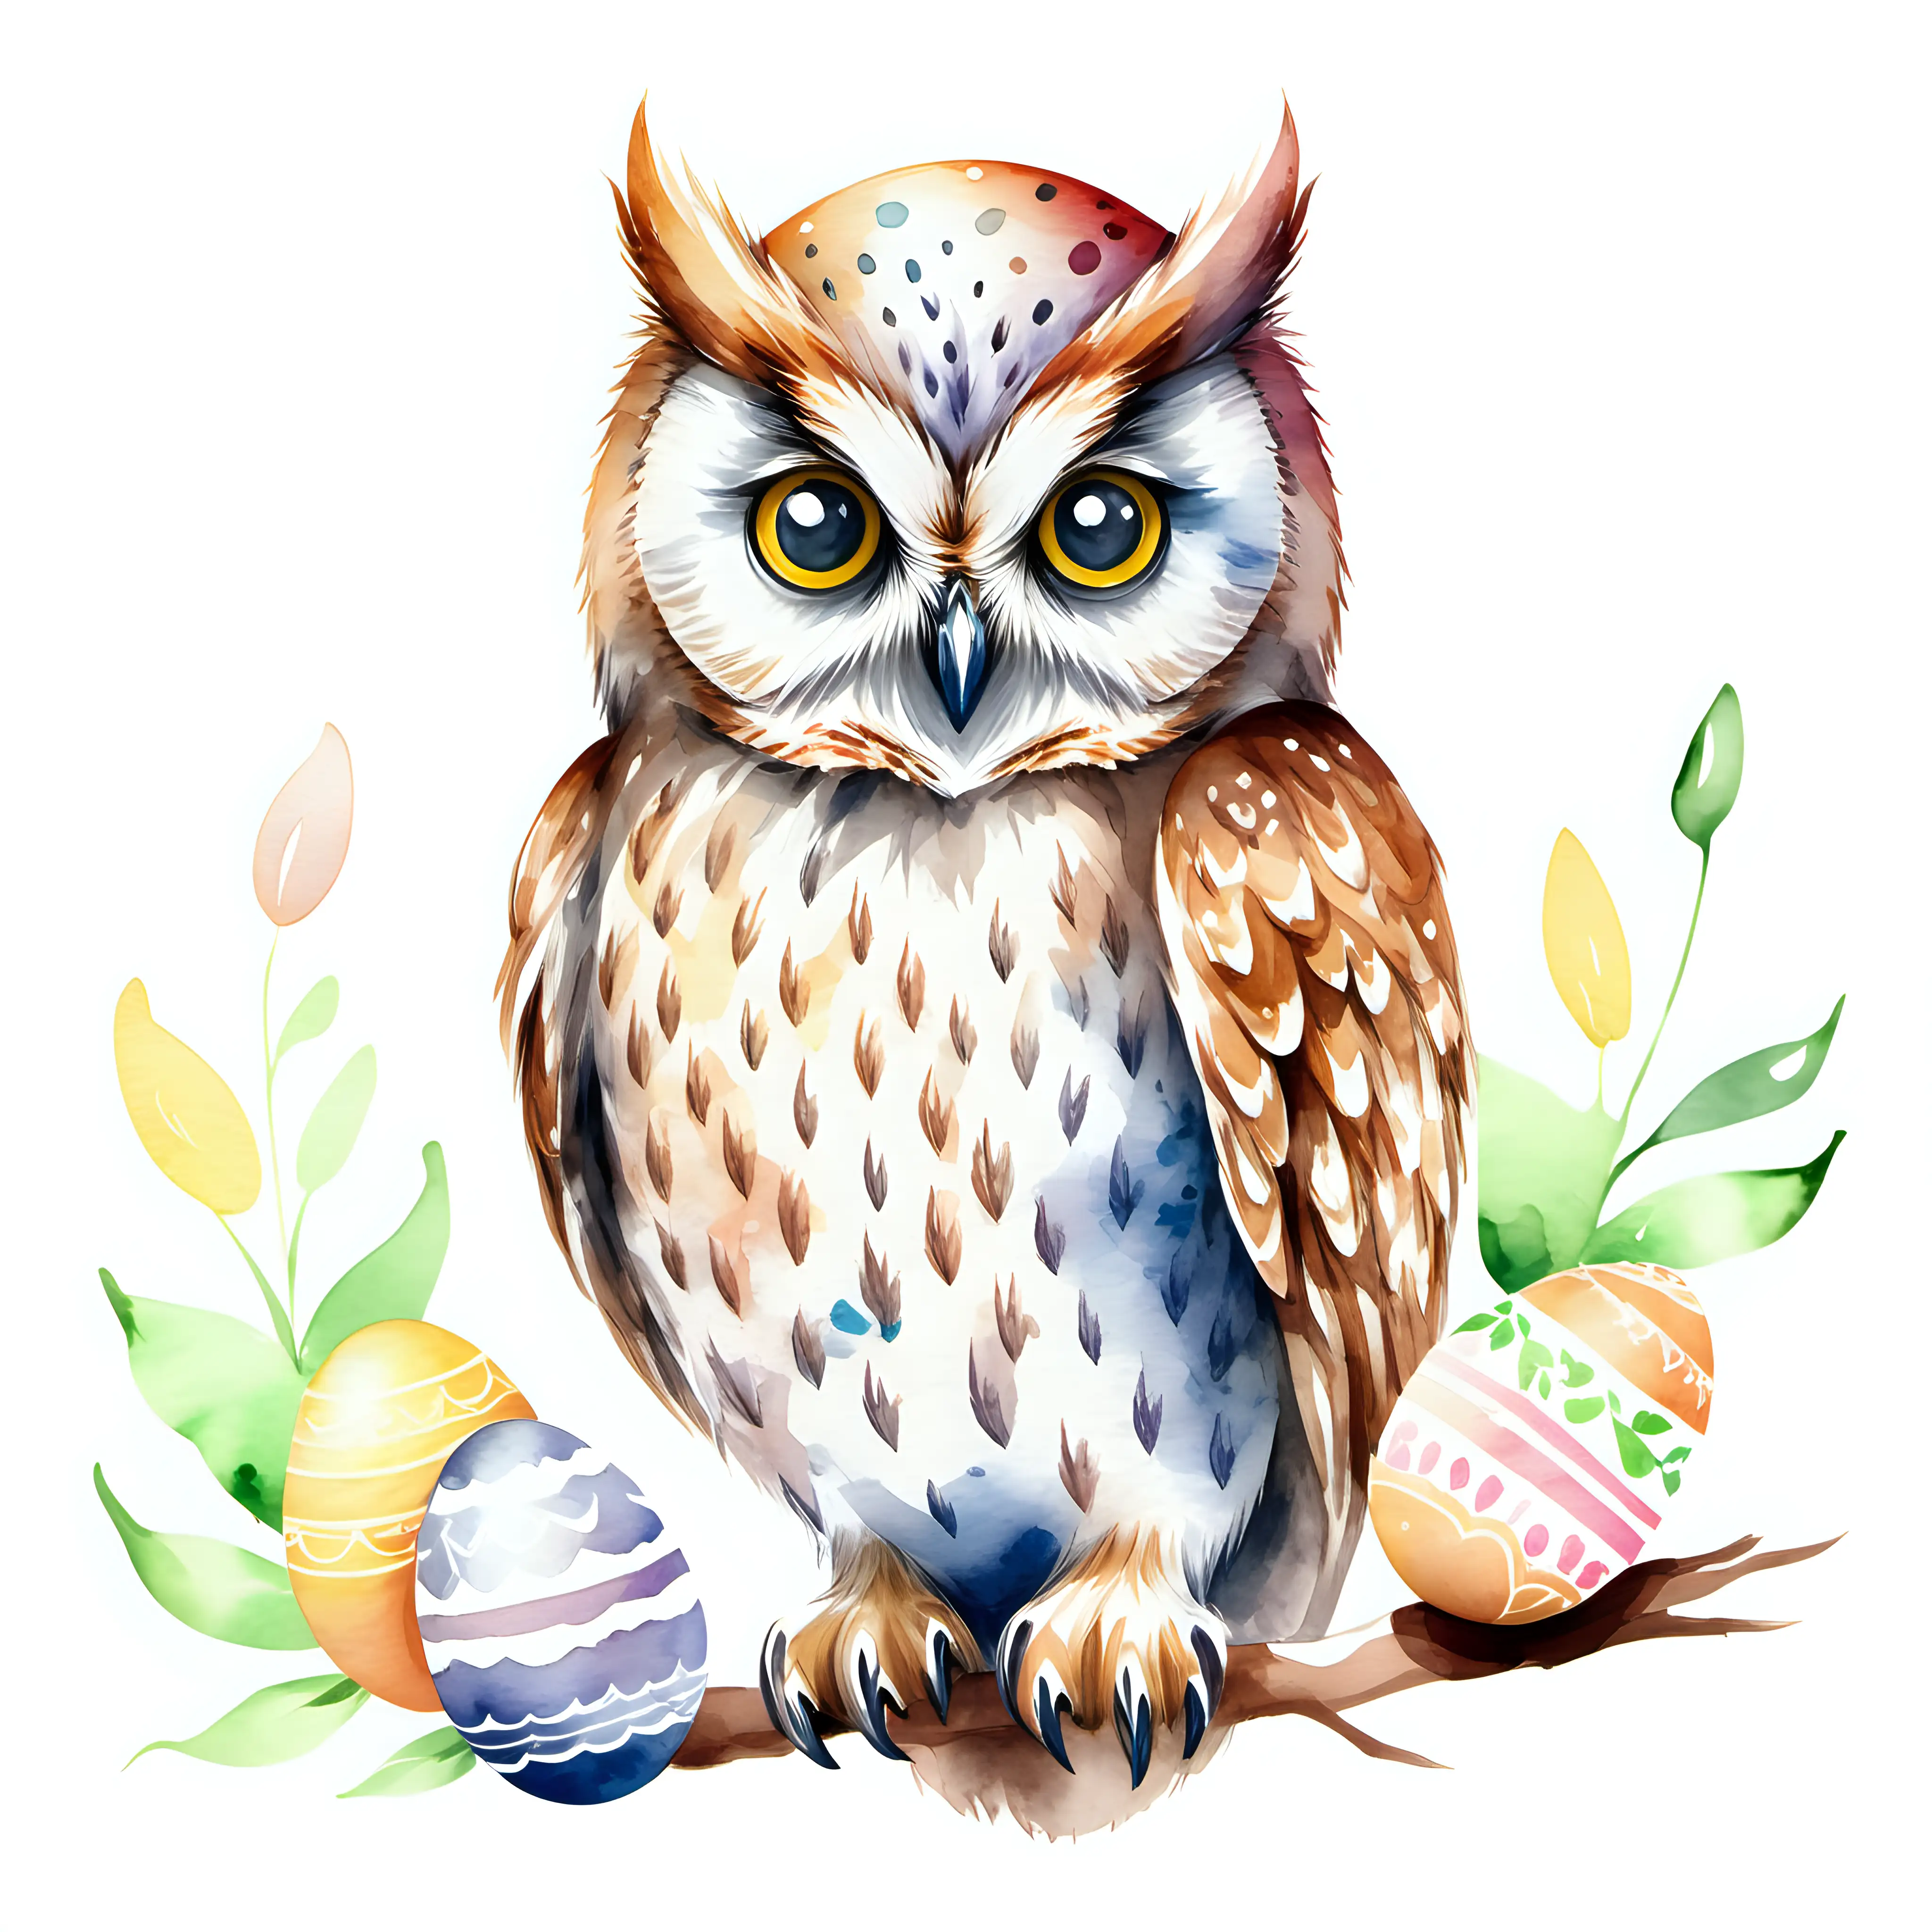 watercolor style, an easter owl on a white background.